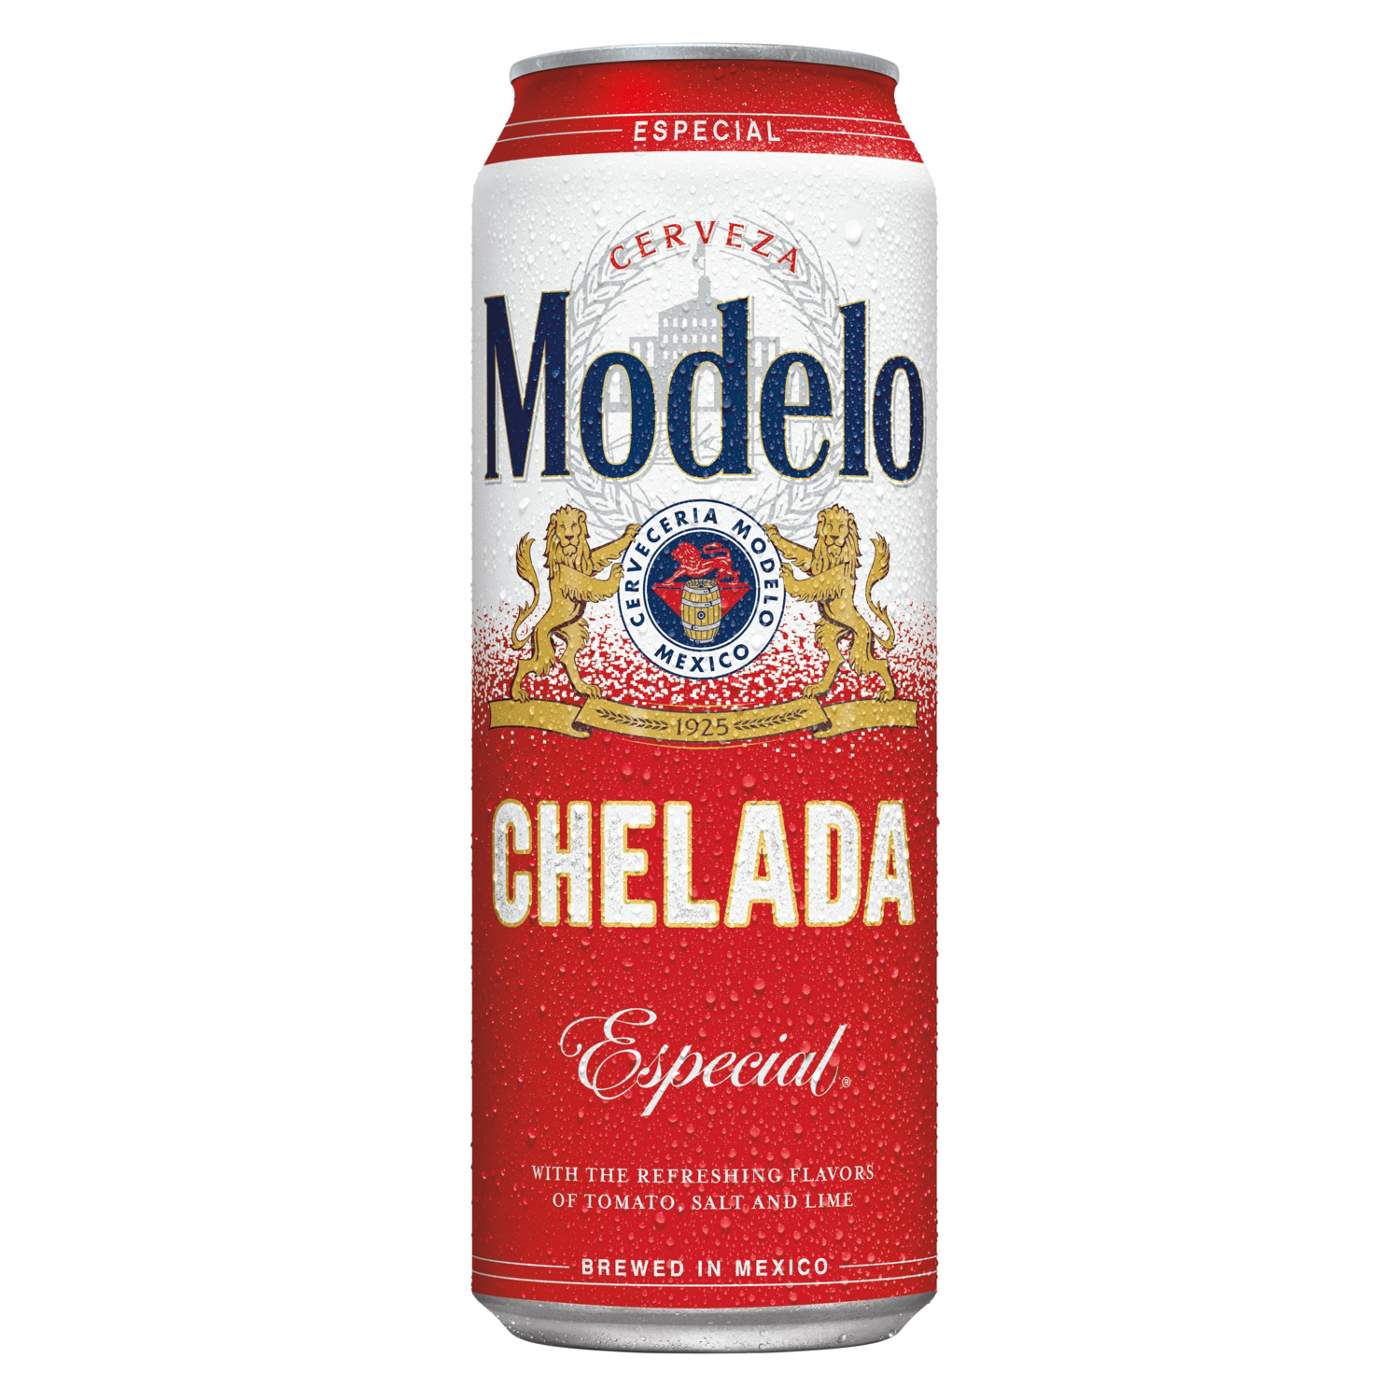 Modelo Chelada Mexican Import Flavored Beer 24 oz Cans, 3 pk; image 4 of 10